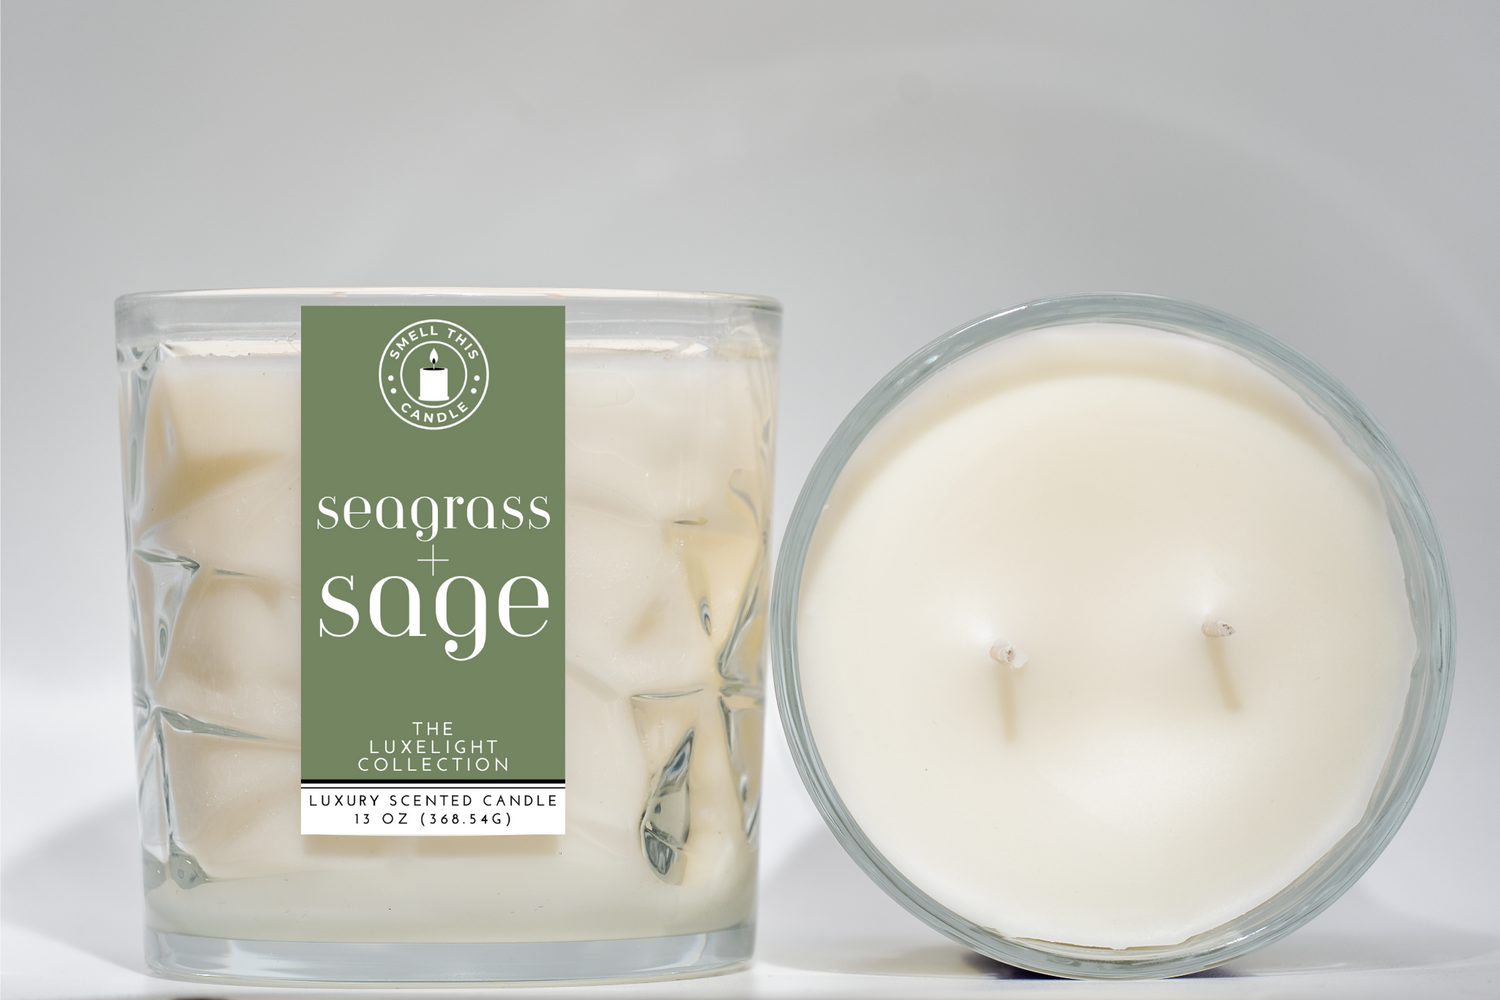 Seagrass + Sage candle